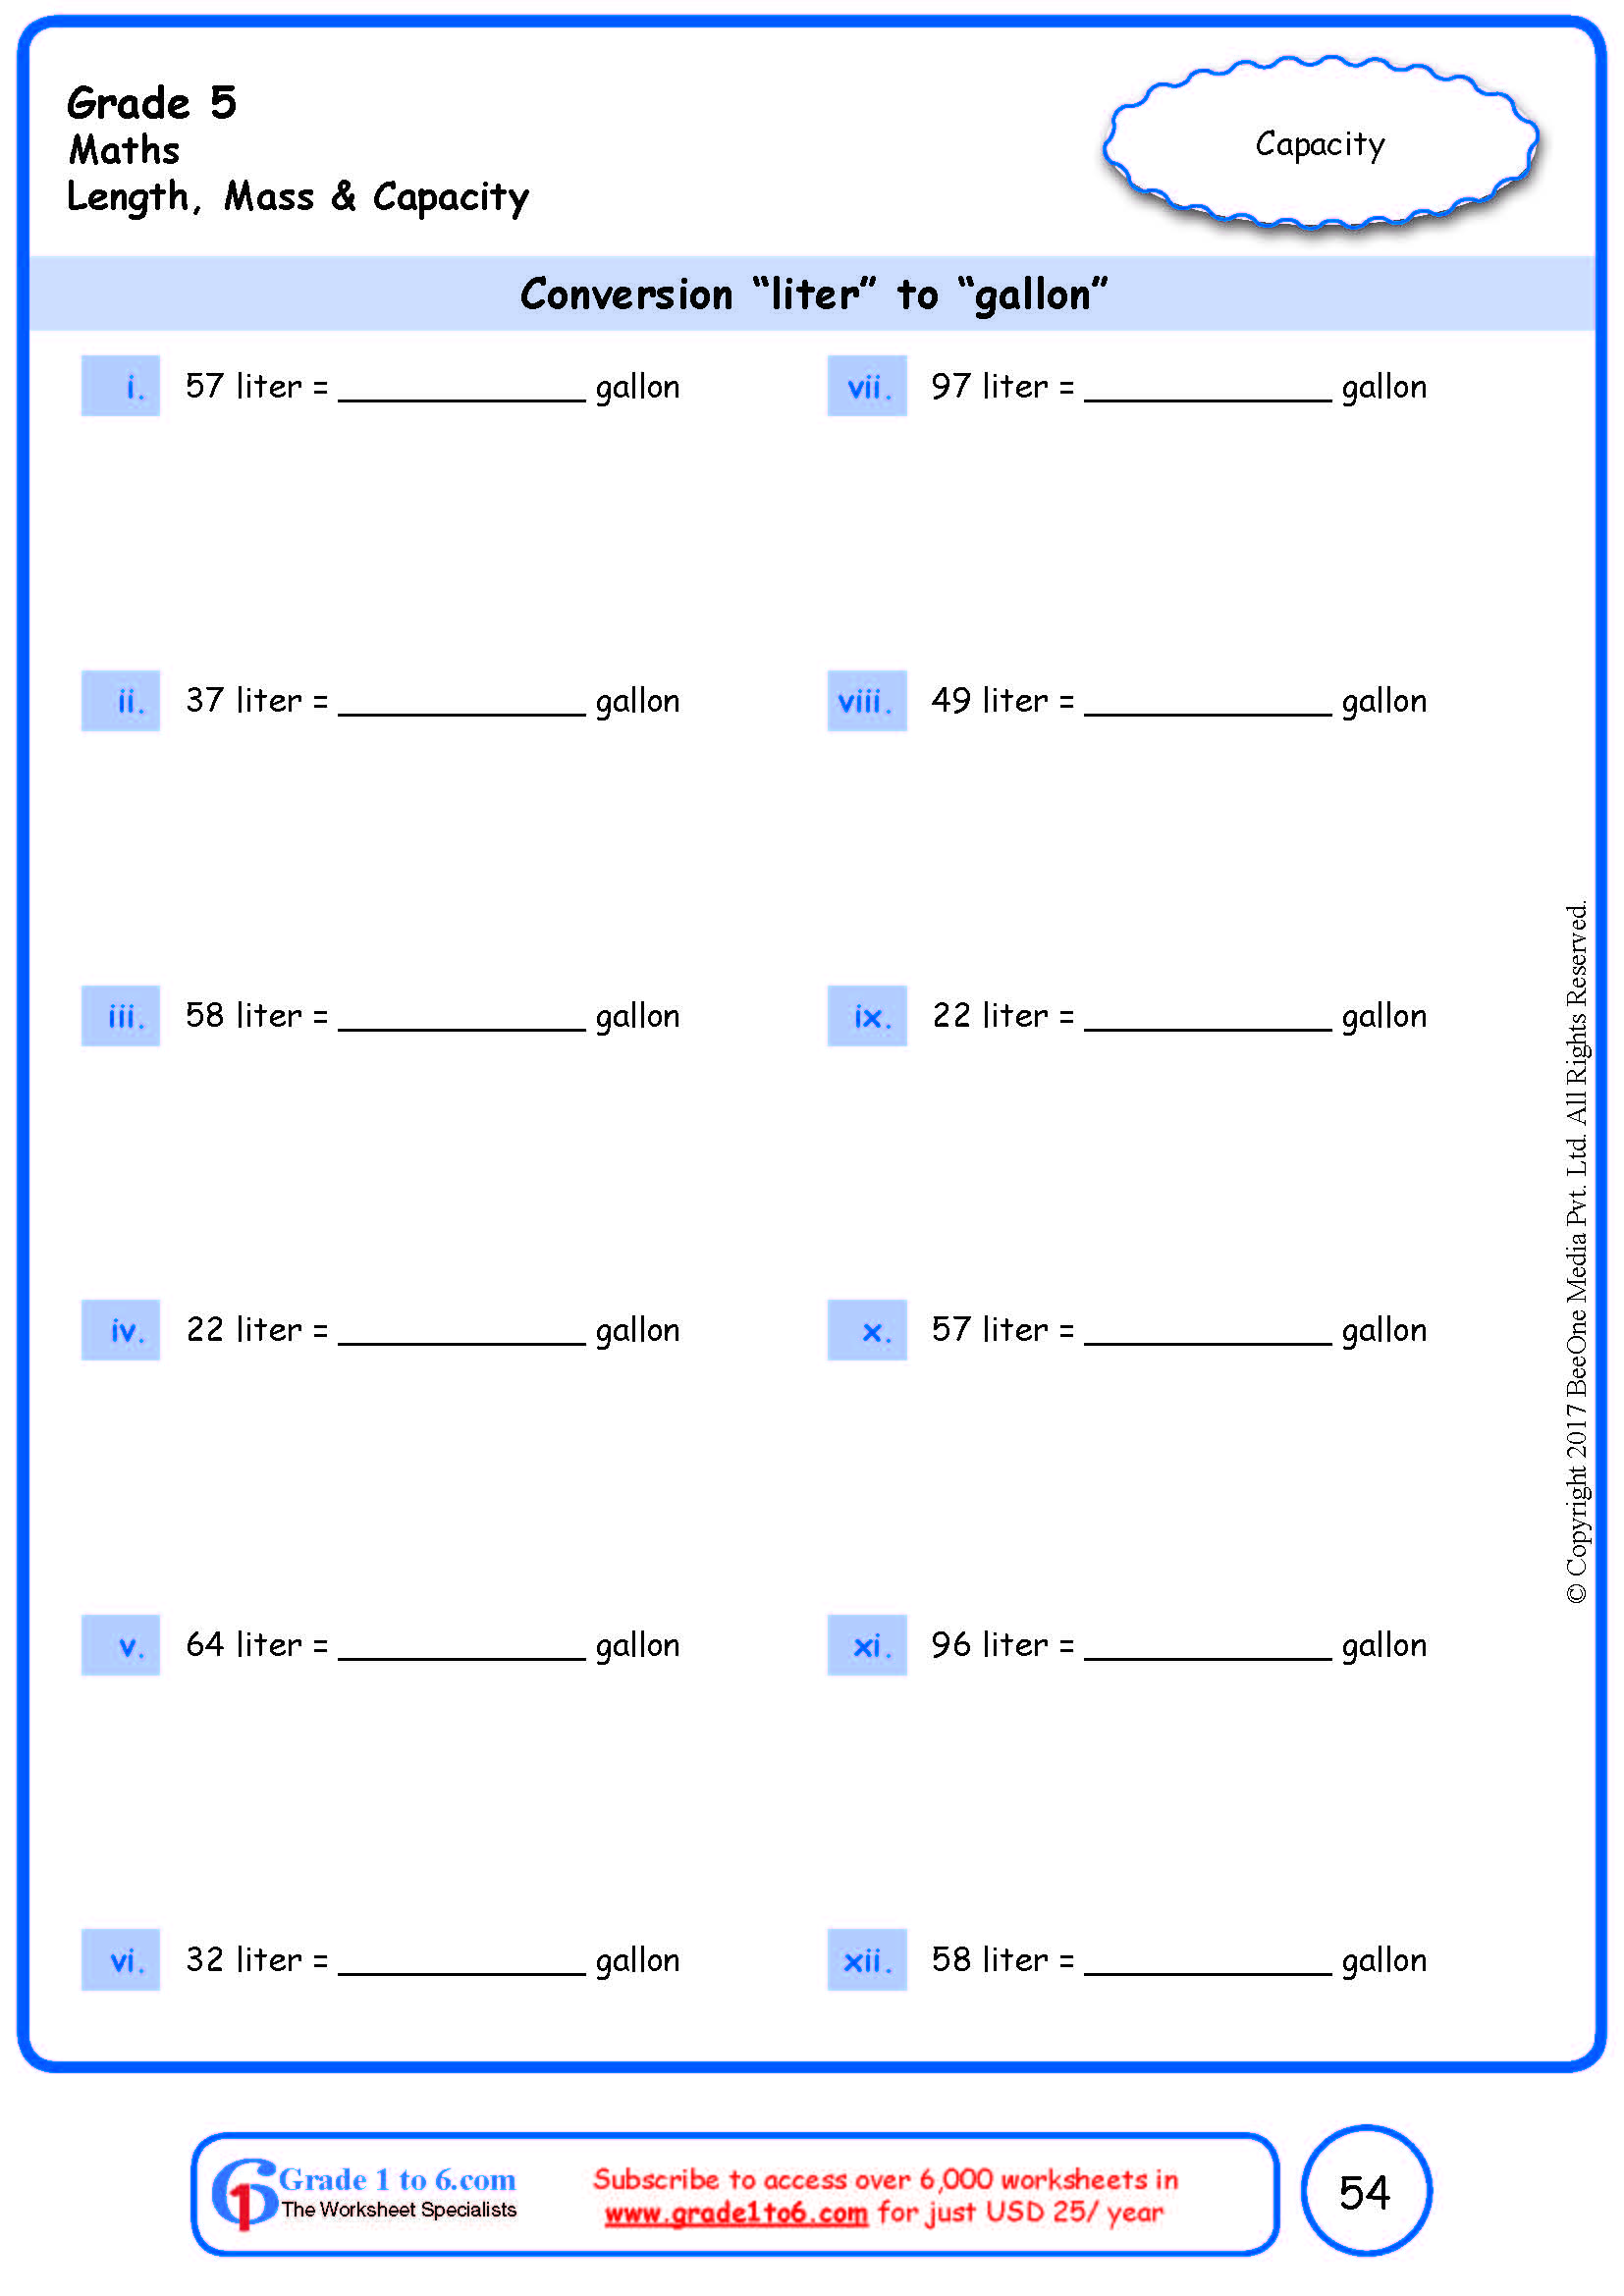 grade-5-conversion-to-liter-to-gallon-worksheets-www-grade1to6